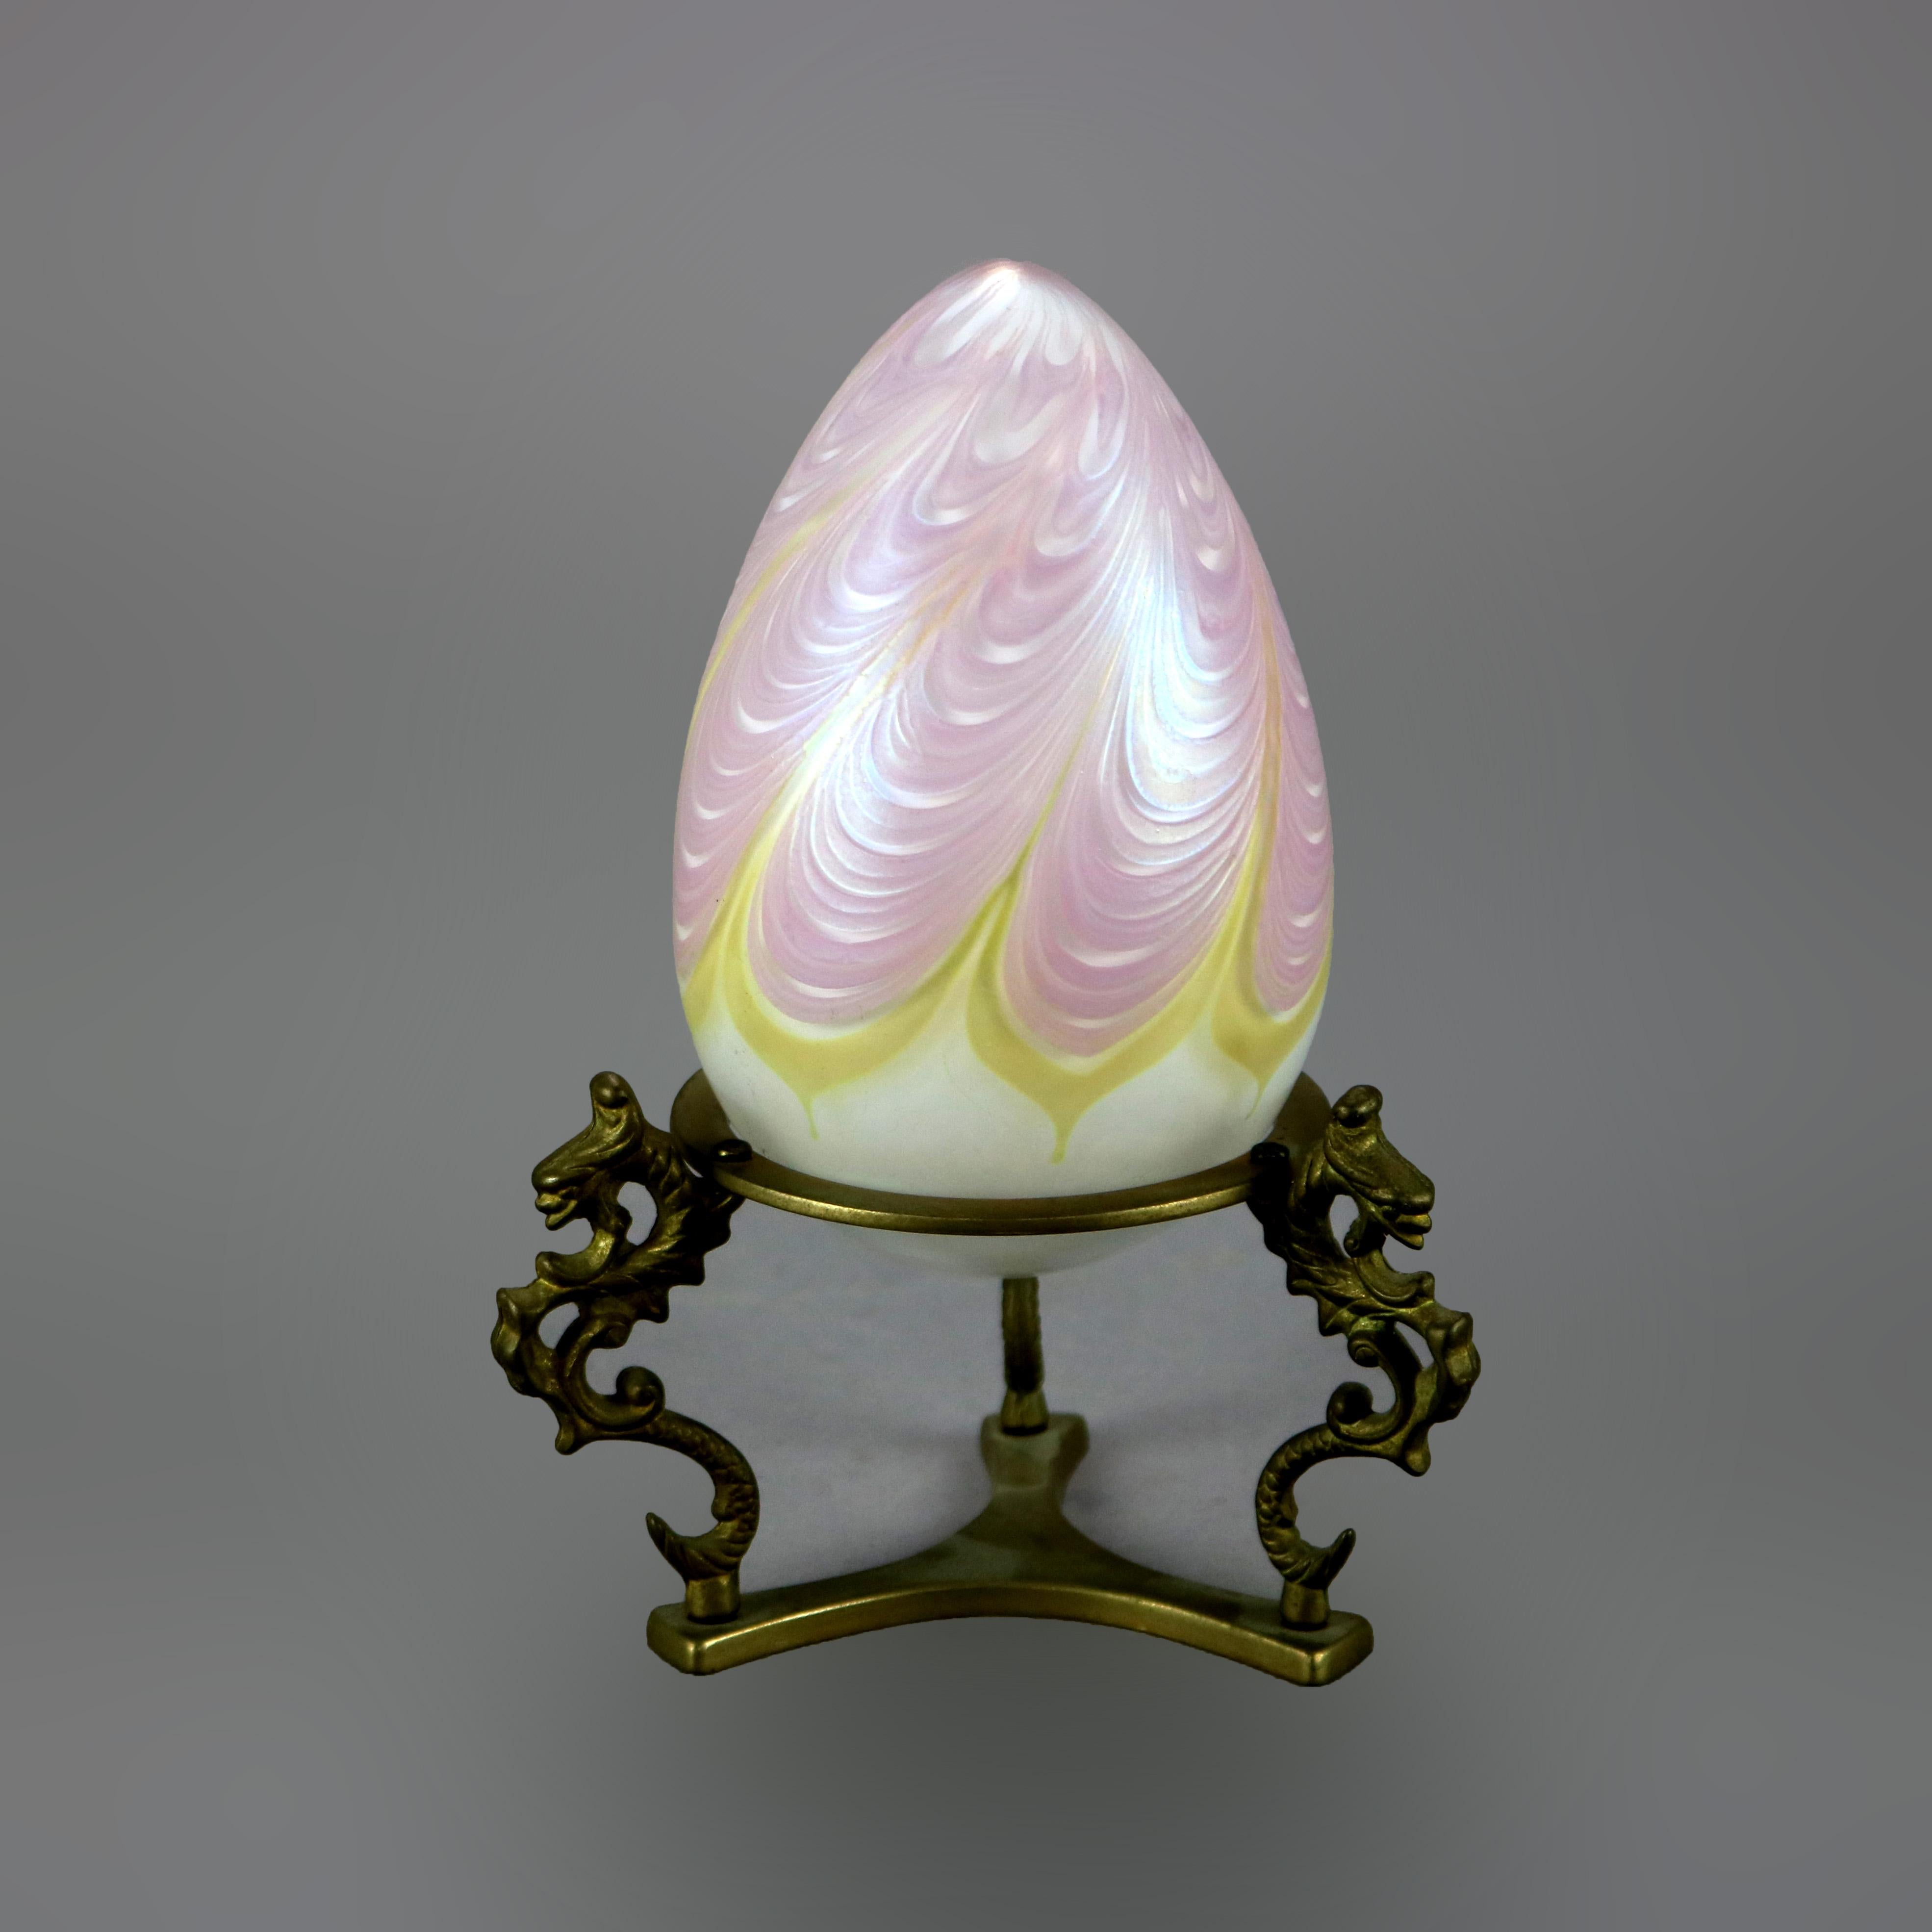 An art glass egg in the manner of Loetz offers pulled feather design and sits on figural cast brass stand having three dragon form legs, 20th century

Measures - 7.5'' H x 5'' W x 5'' D.